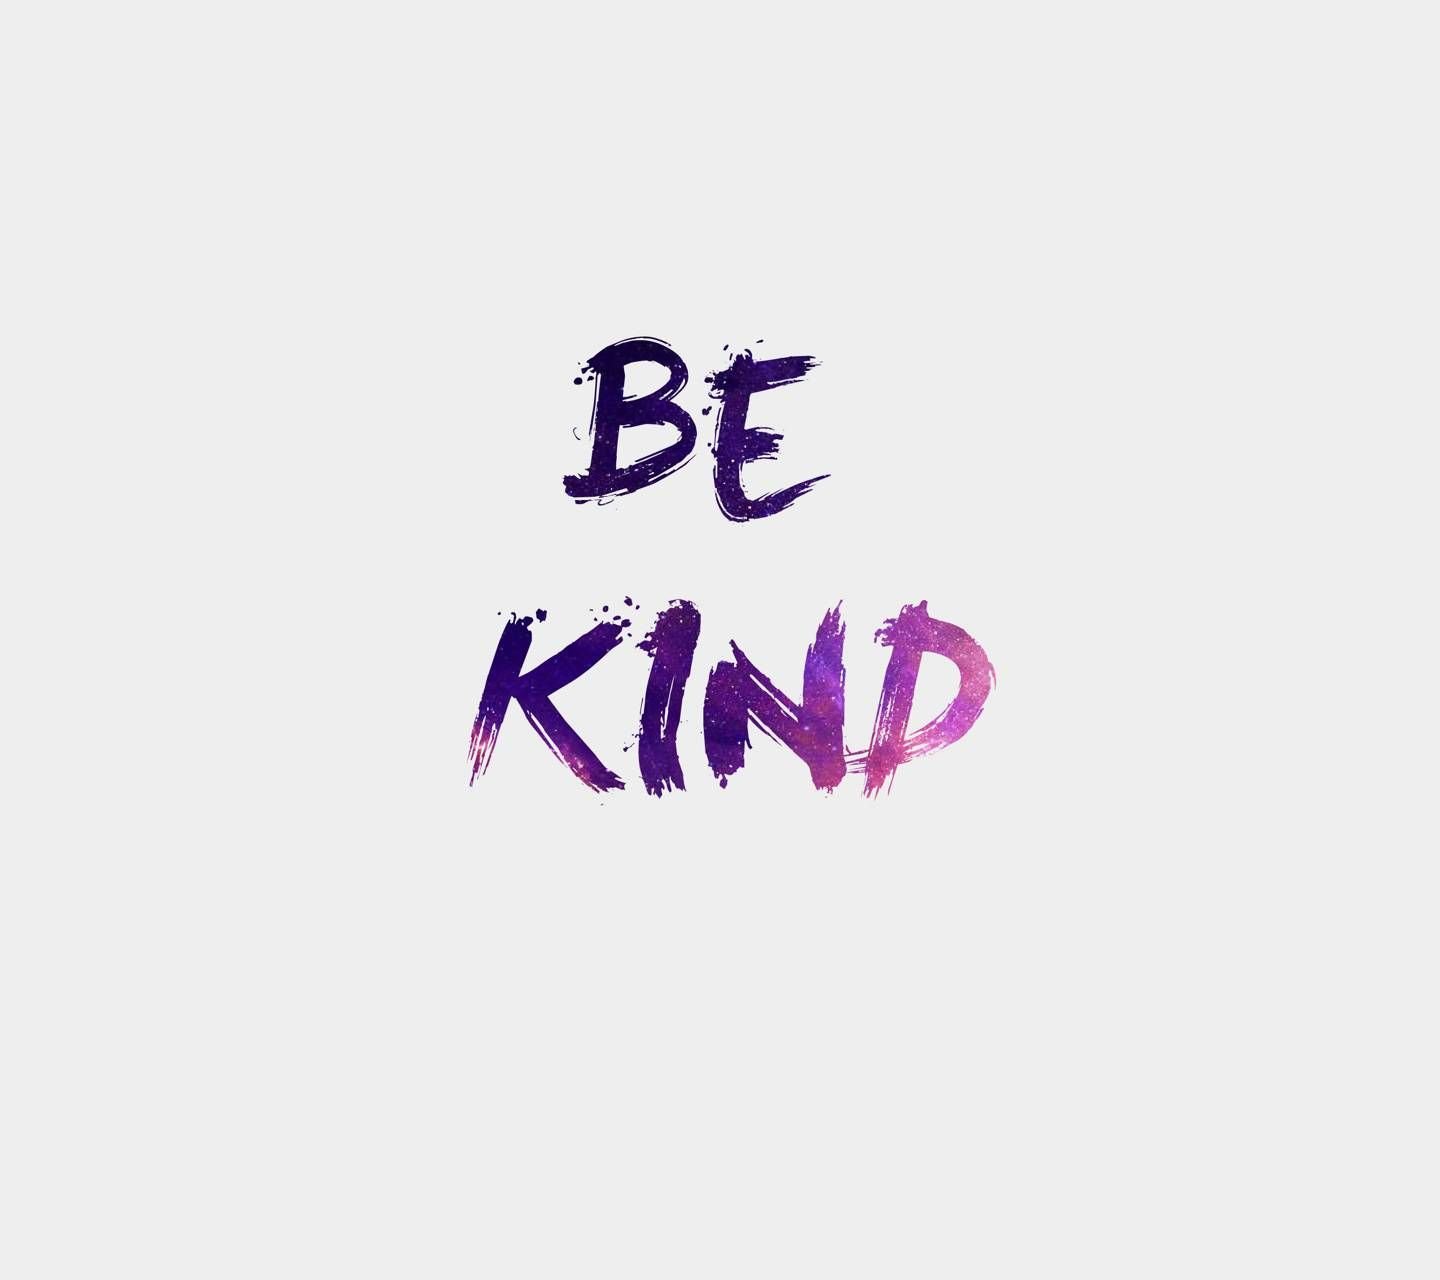 Be Kind wallpapers by TheWelti